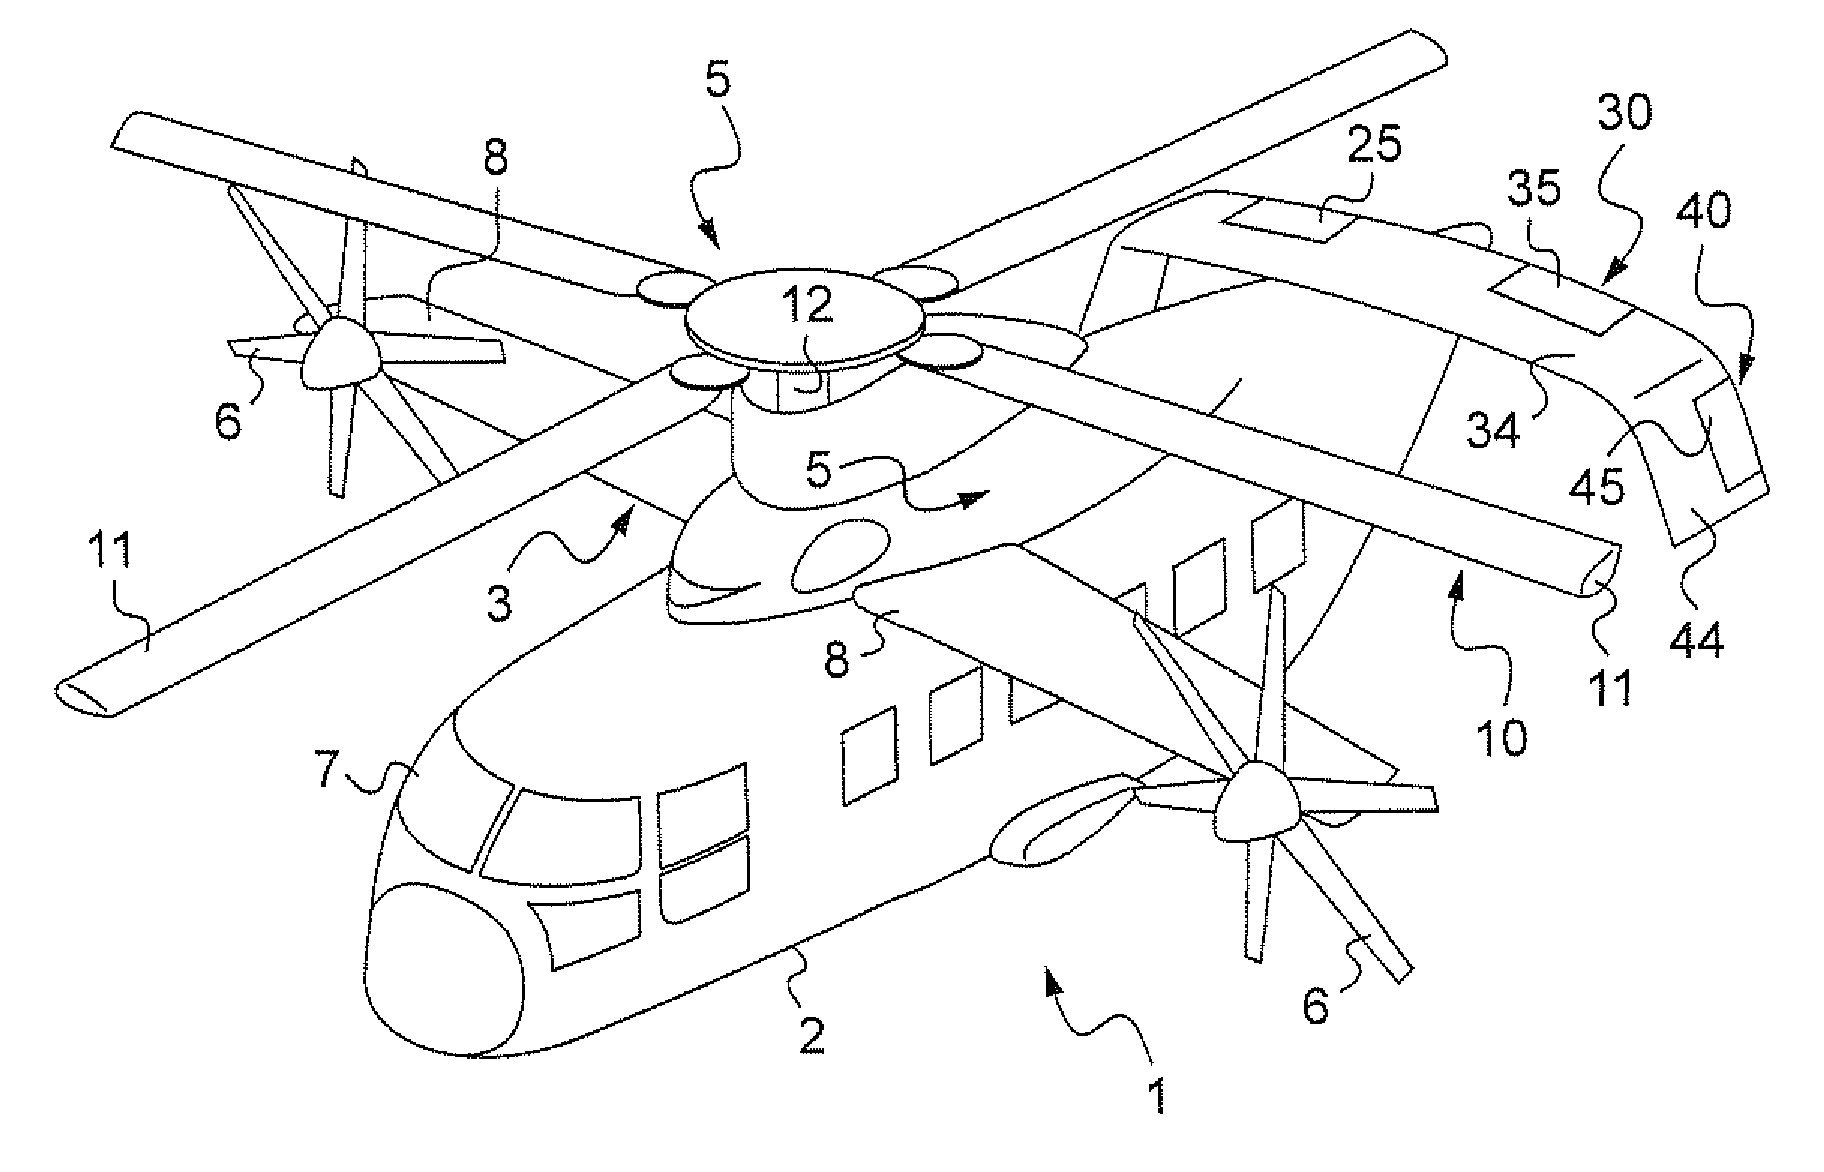 Fast hybrid helicopter with long range and an optimized lift rotor